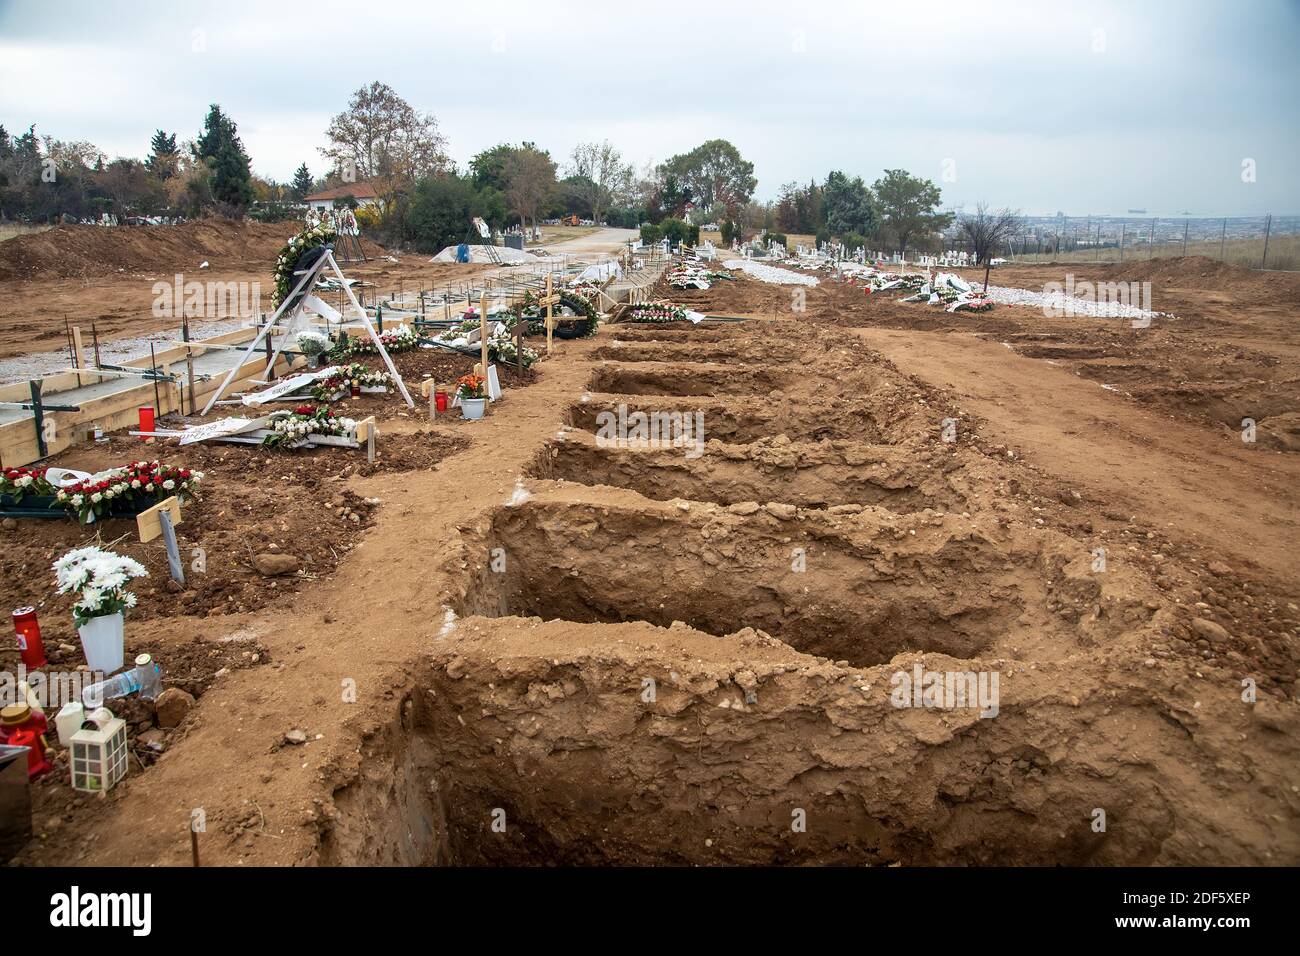 Thessaloniki, Greece - December 3, 2020: Tens new graves of Covid-19 victims in a cemetery in Evosmos, Thessaloniki Stock Photo